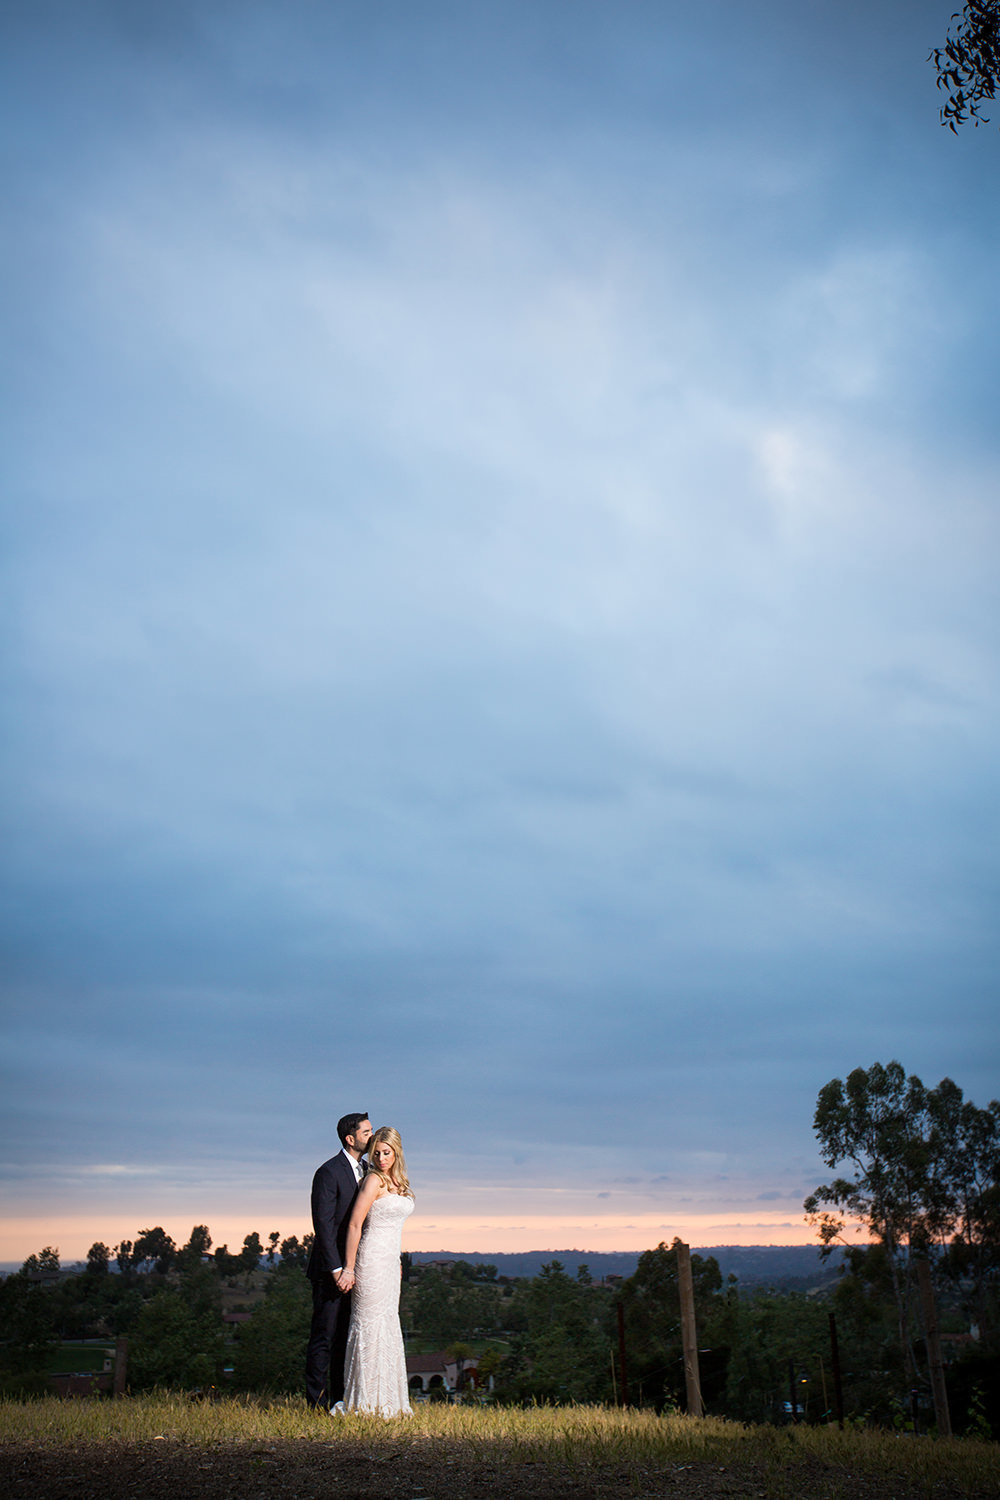 stunning night image with bride and groom